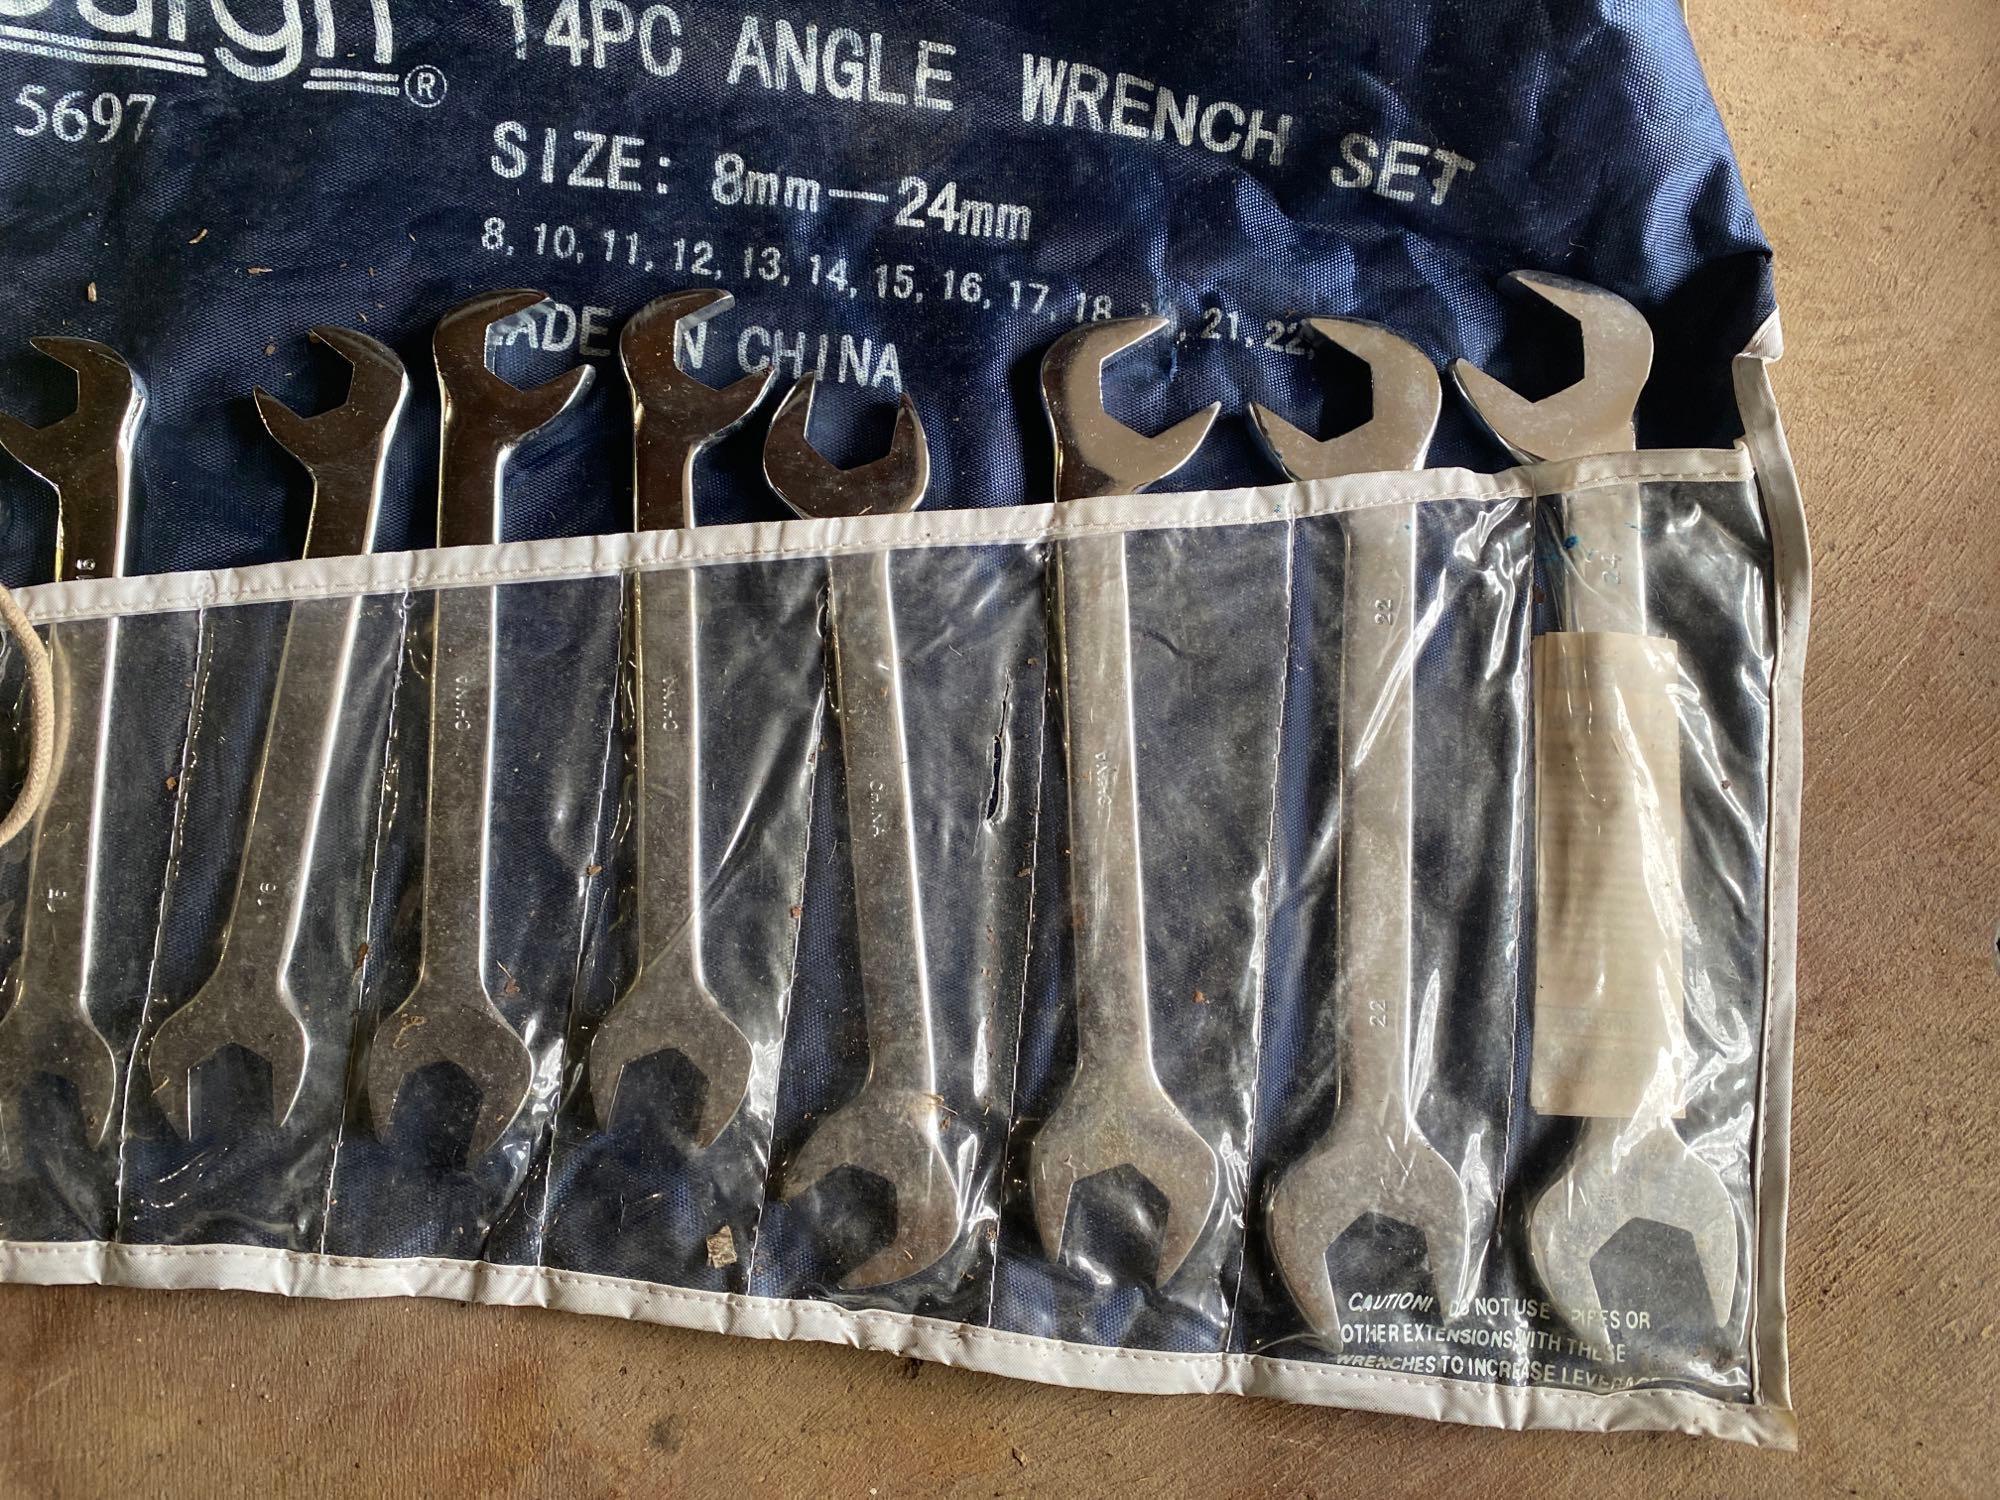 standard and metric wrenches